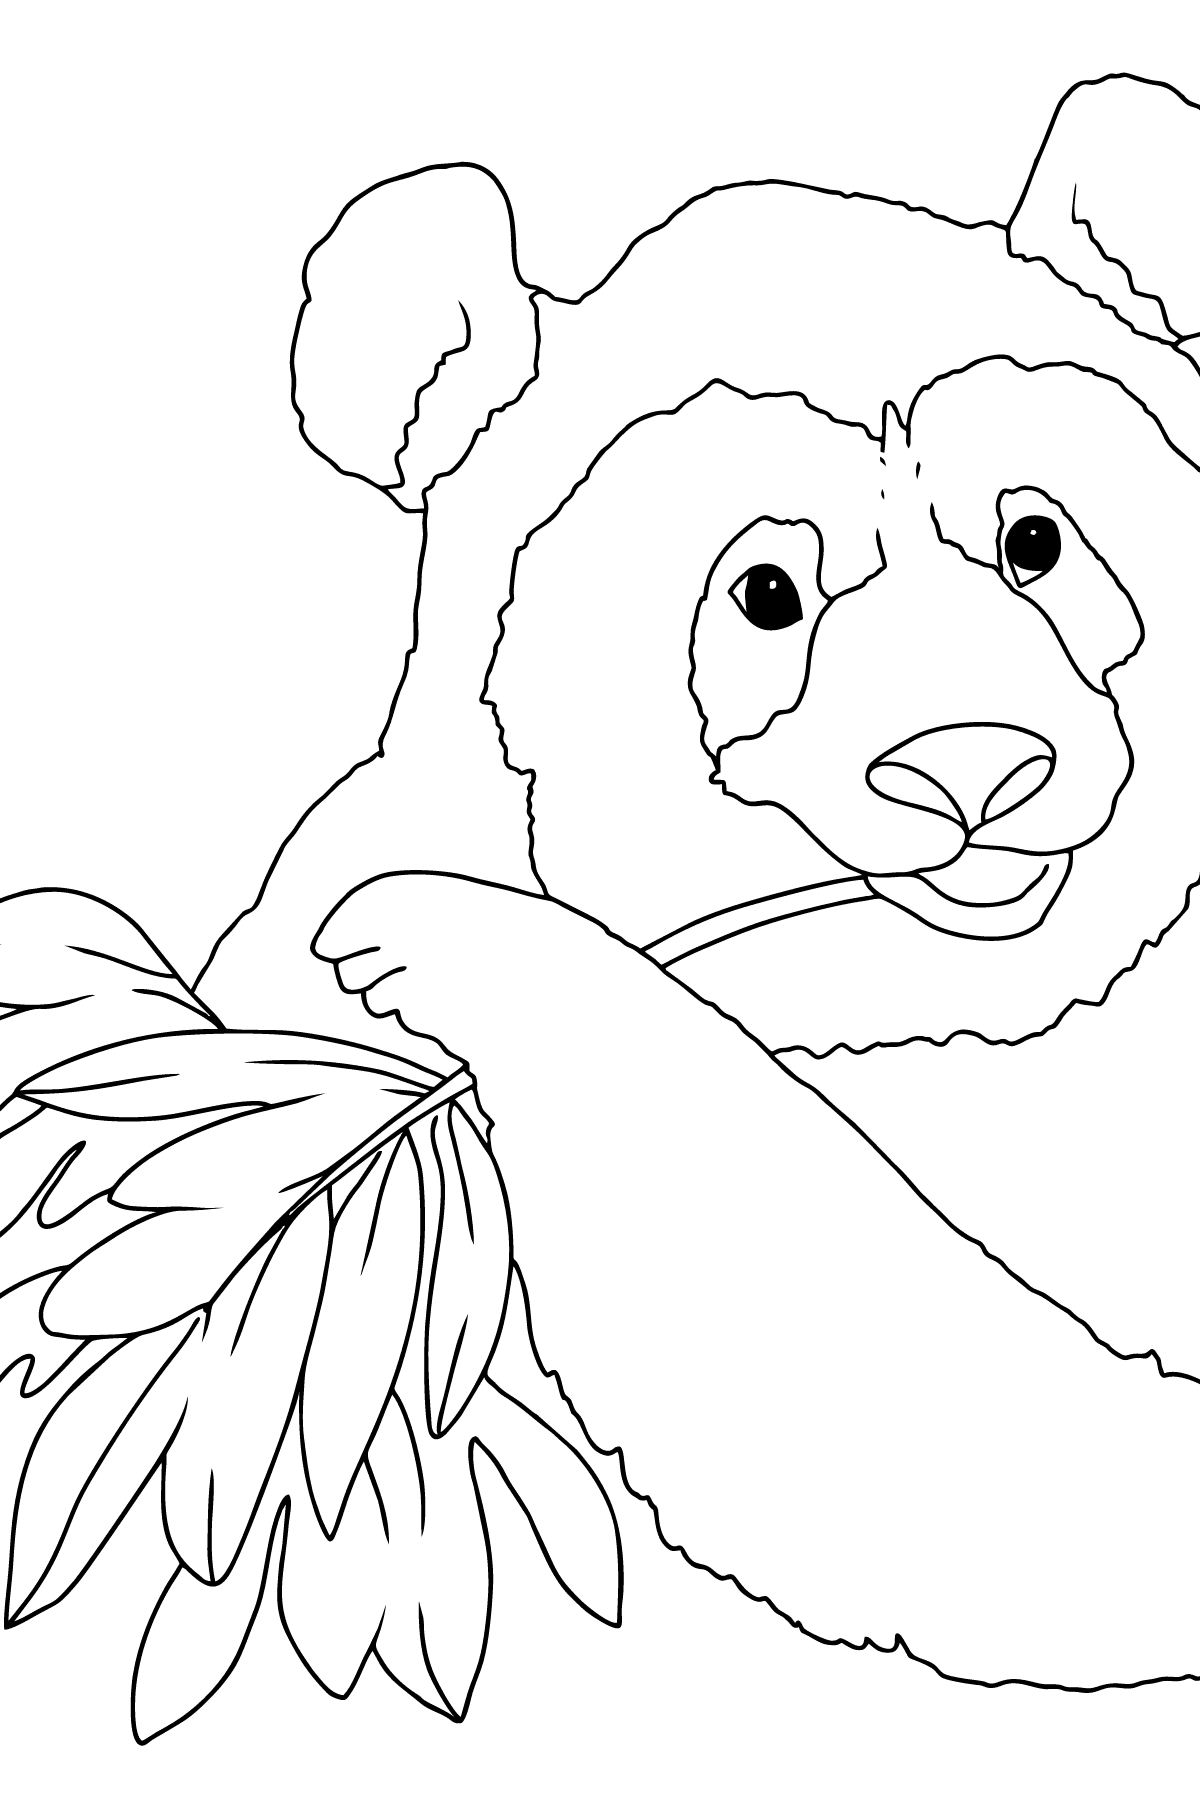 Coloring Page - A Panda is Eating Bamboo Leaves - Coloring Pages for Children